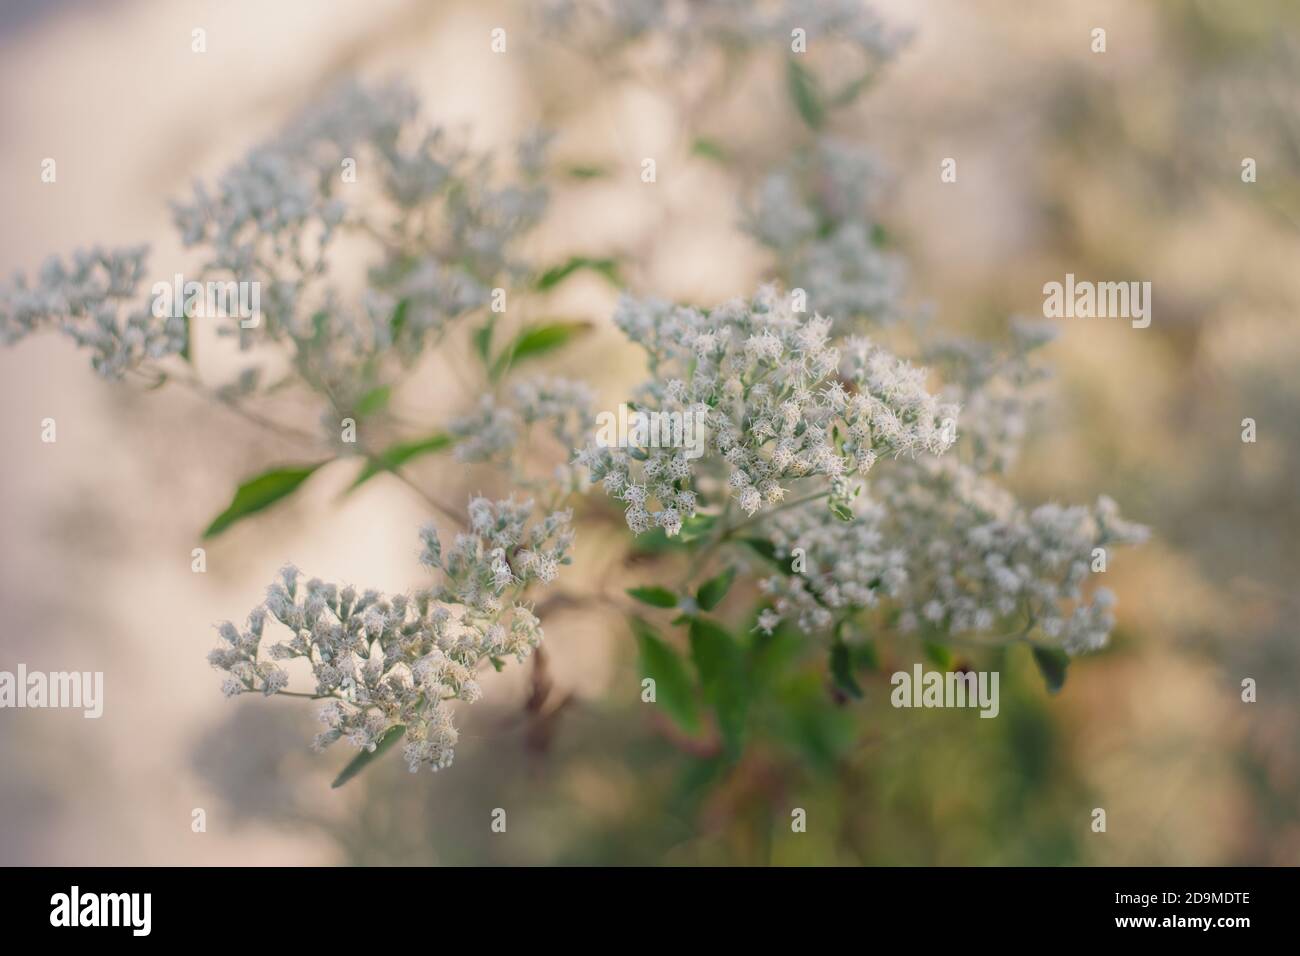 Selective focus white floral background Stock Photo